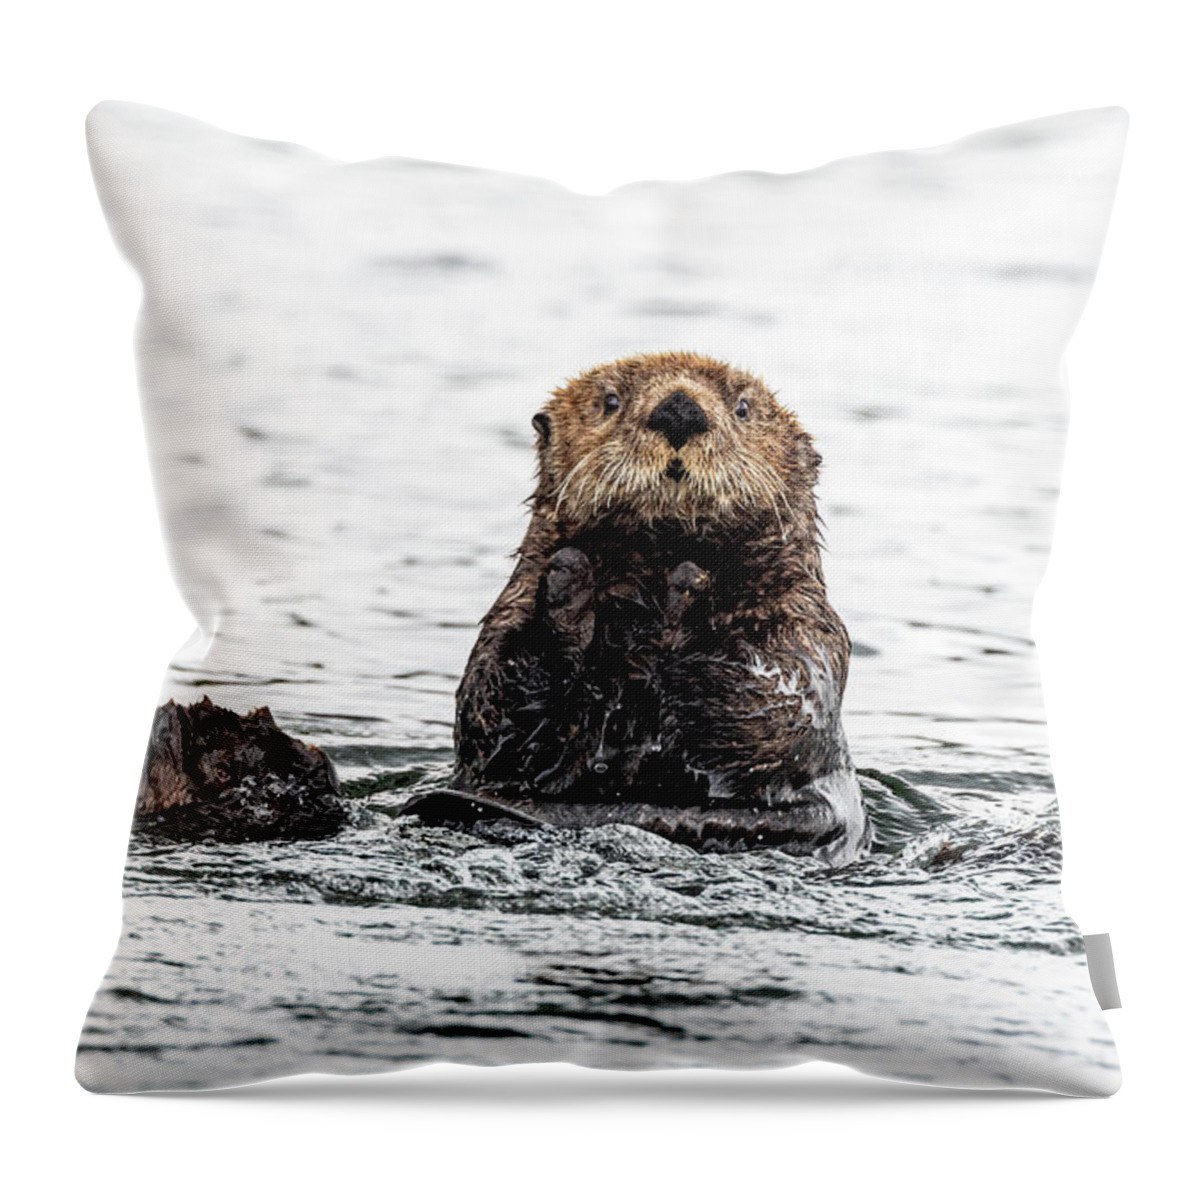 Sea Otter Throw Pillow featuring the photograph Sea Otter by Ian Stotesbury